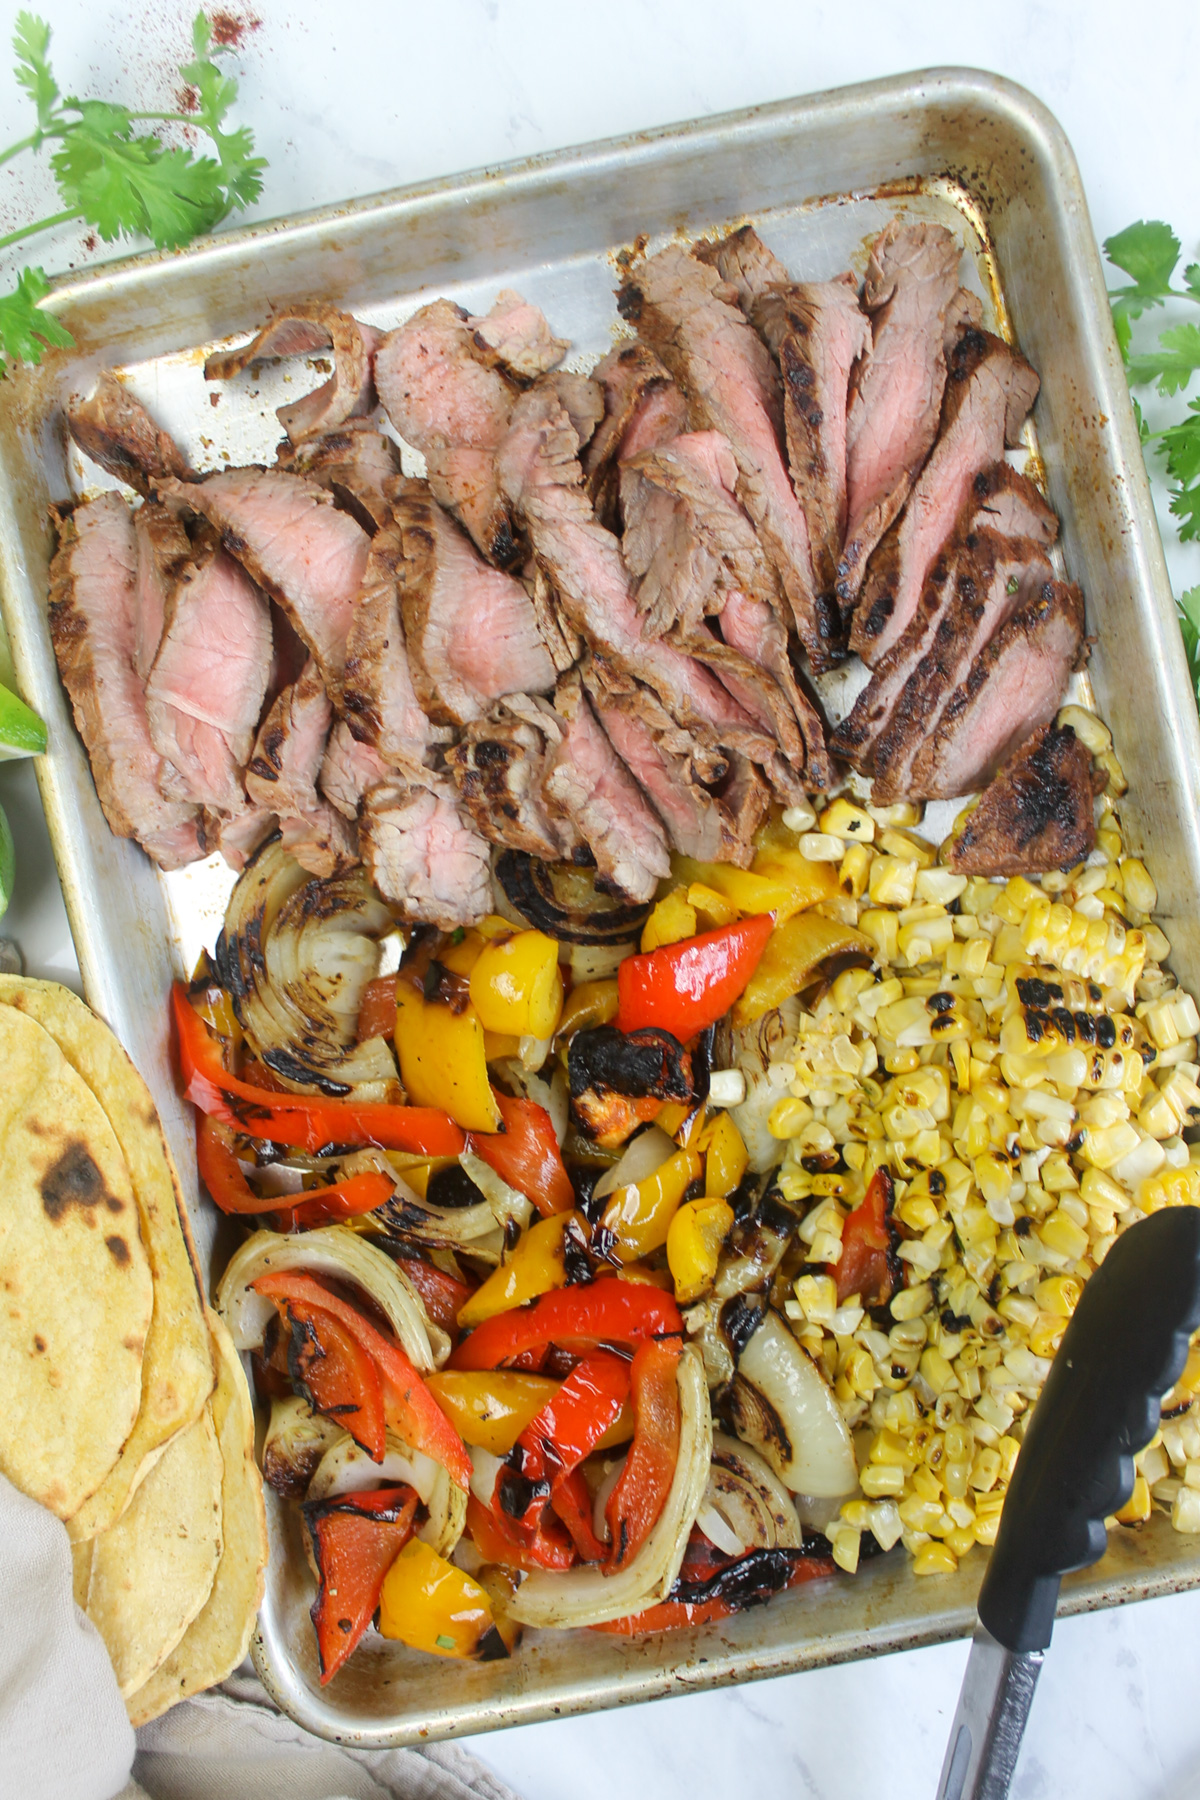 A sheet pan of sliced steak, peppers, onions, and charred corn cut off the cob.